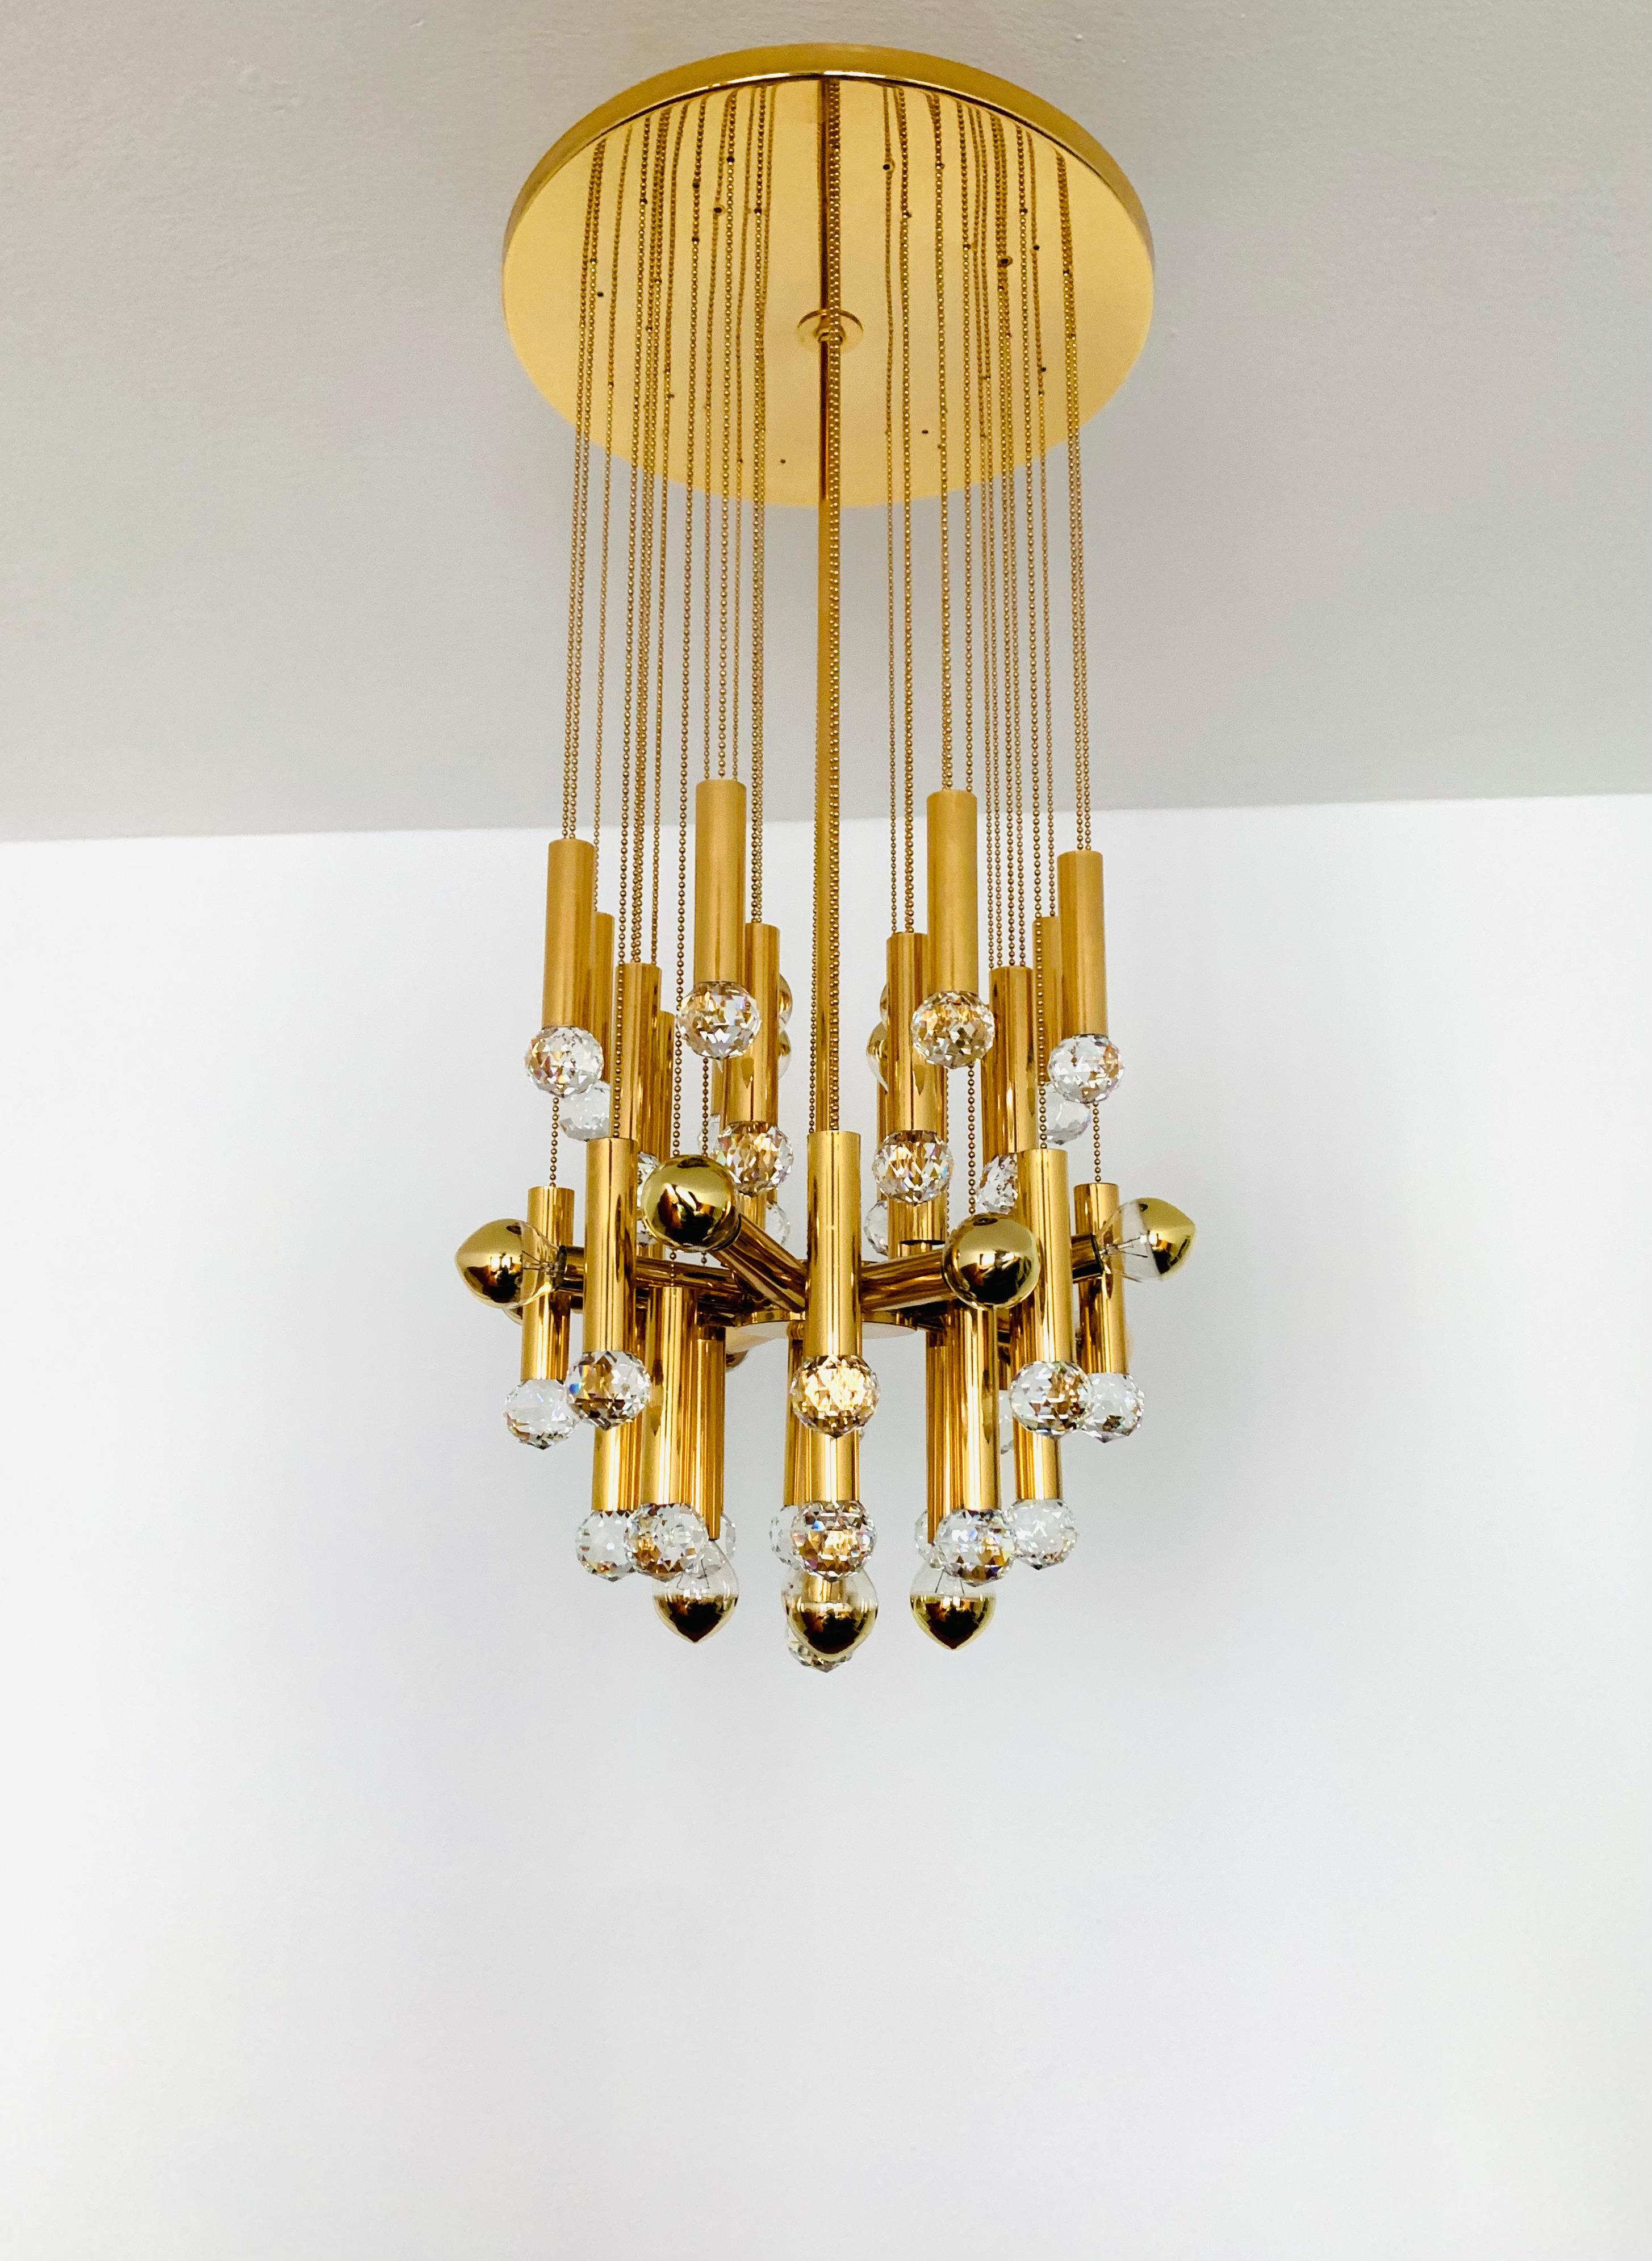 Imposing glass ceiling lamp from the 1960s.
Extraordinarily successful design and very high-quality workmanship.
The 33 crystals spread a spectacular play of light in the room.
Very luxurious and an asset to any home.

Condition:

Very good